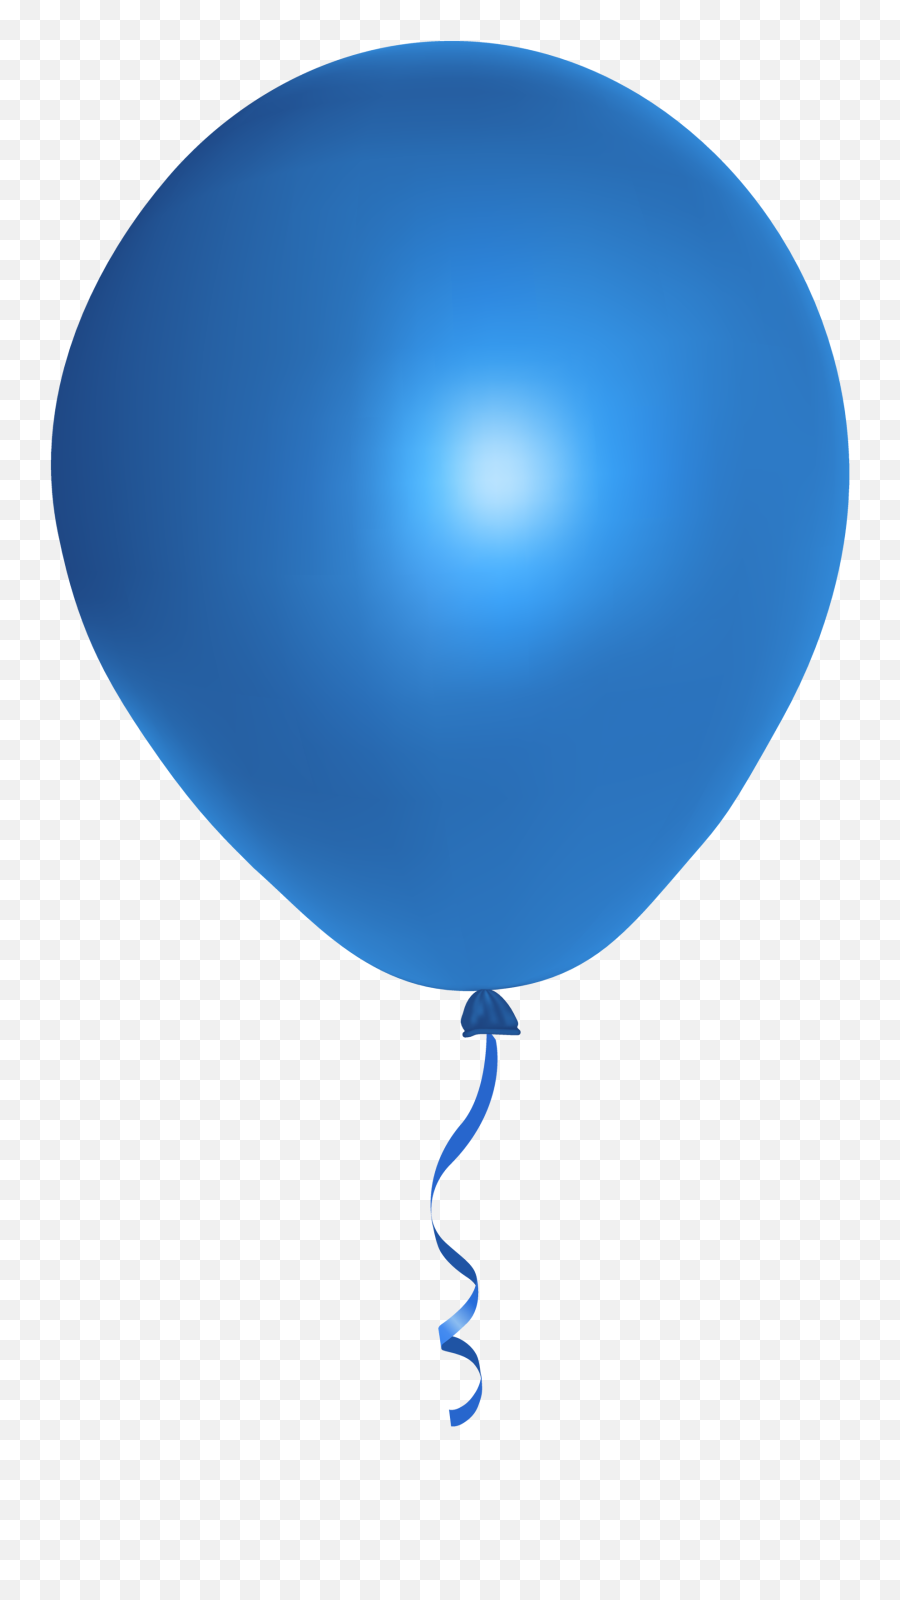 Blue Balloons Images Reverse Search Balloon Clip Art - Png Transparent Background Blue Balloon Png Emoji,Balloon Clipart